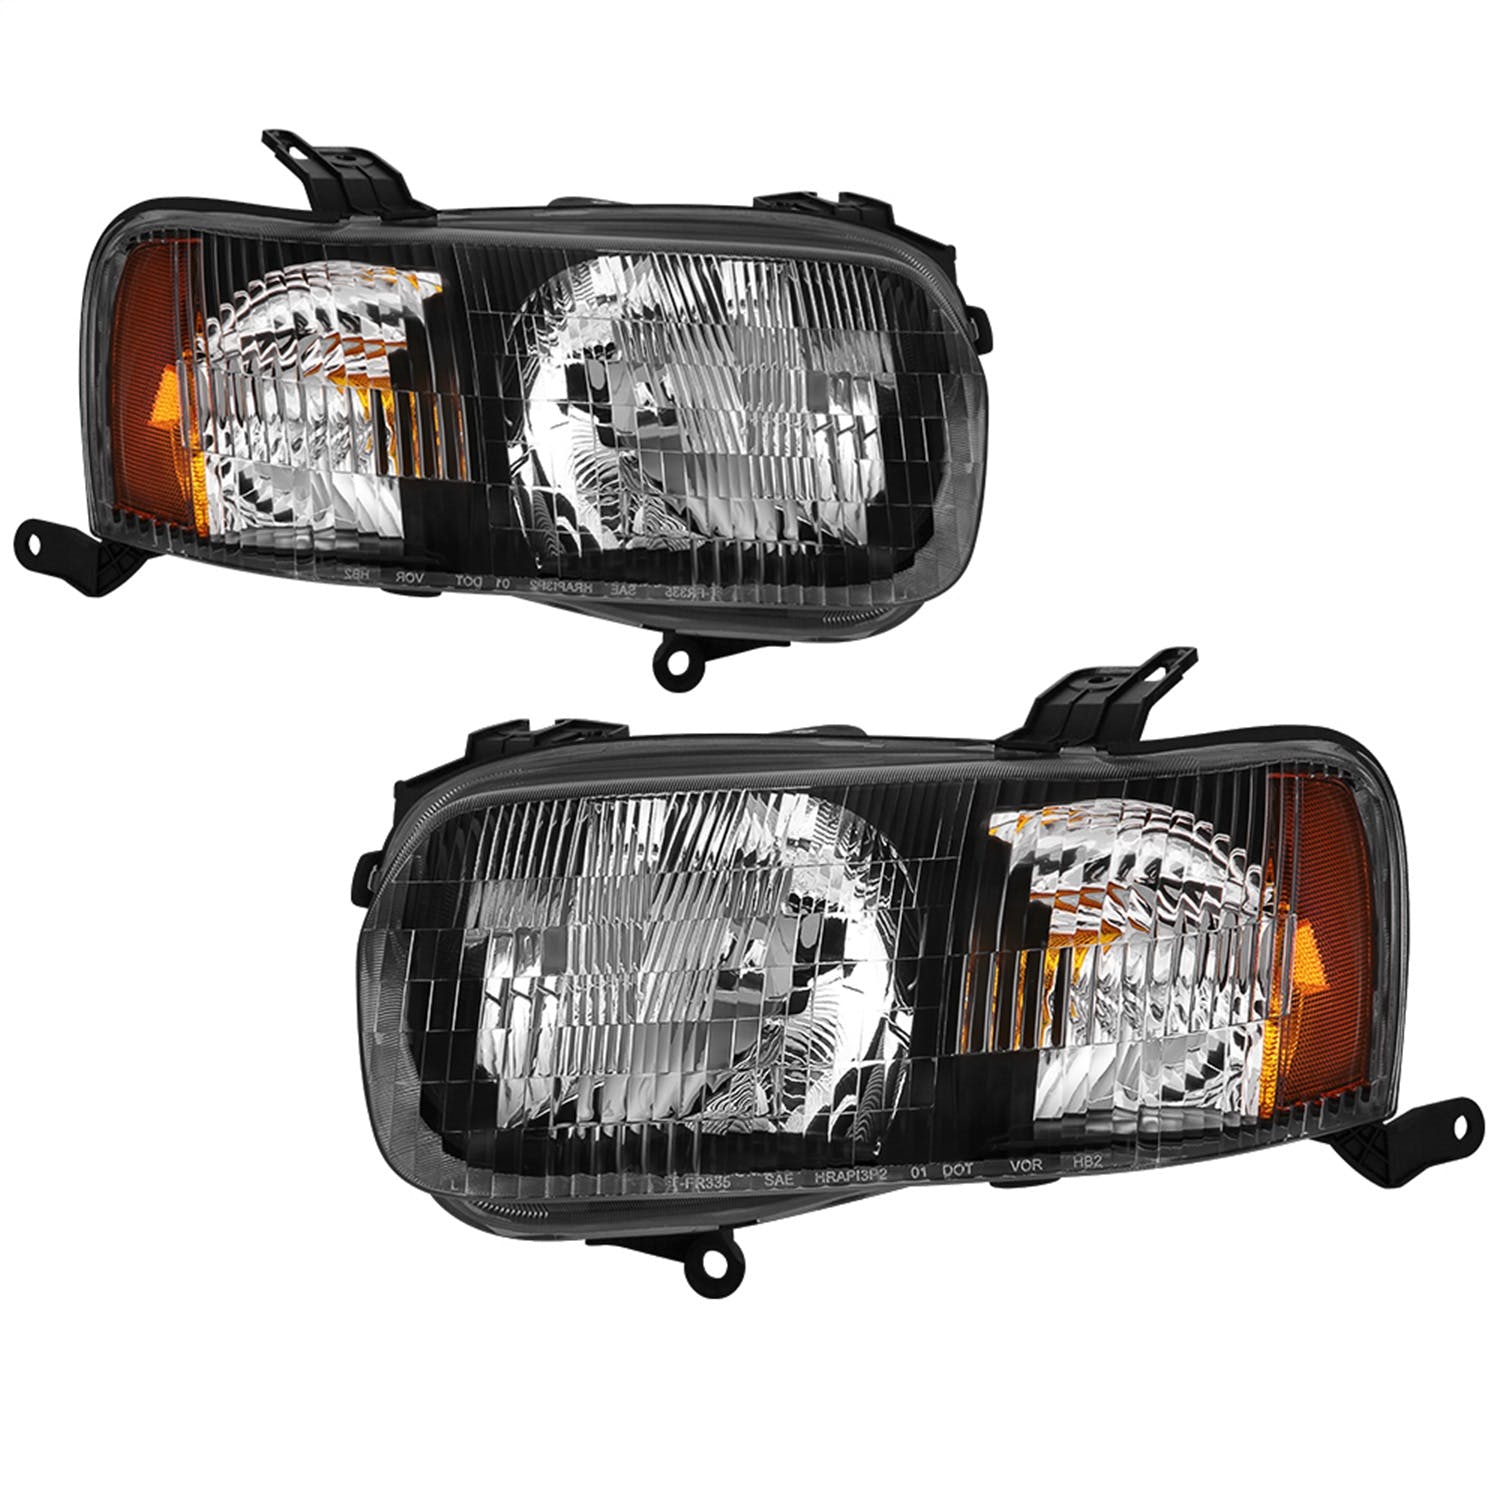 XTUNE POWER 9042591 Ford Escape 01 04 OEM Style Headlights Low Beam 9003(Not Included) ; High Beam 9003(Not Included) ; Signal 3157NA(Not Included) Black